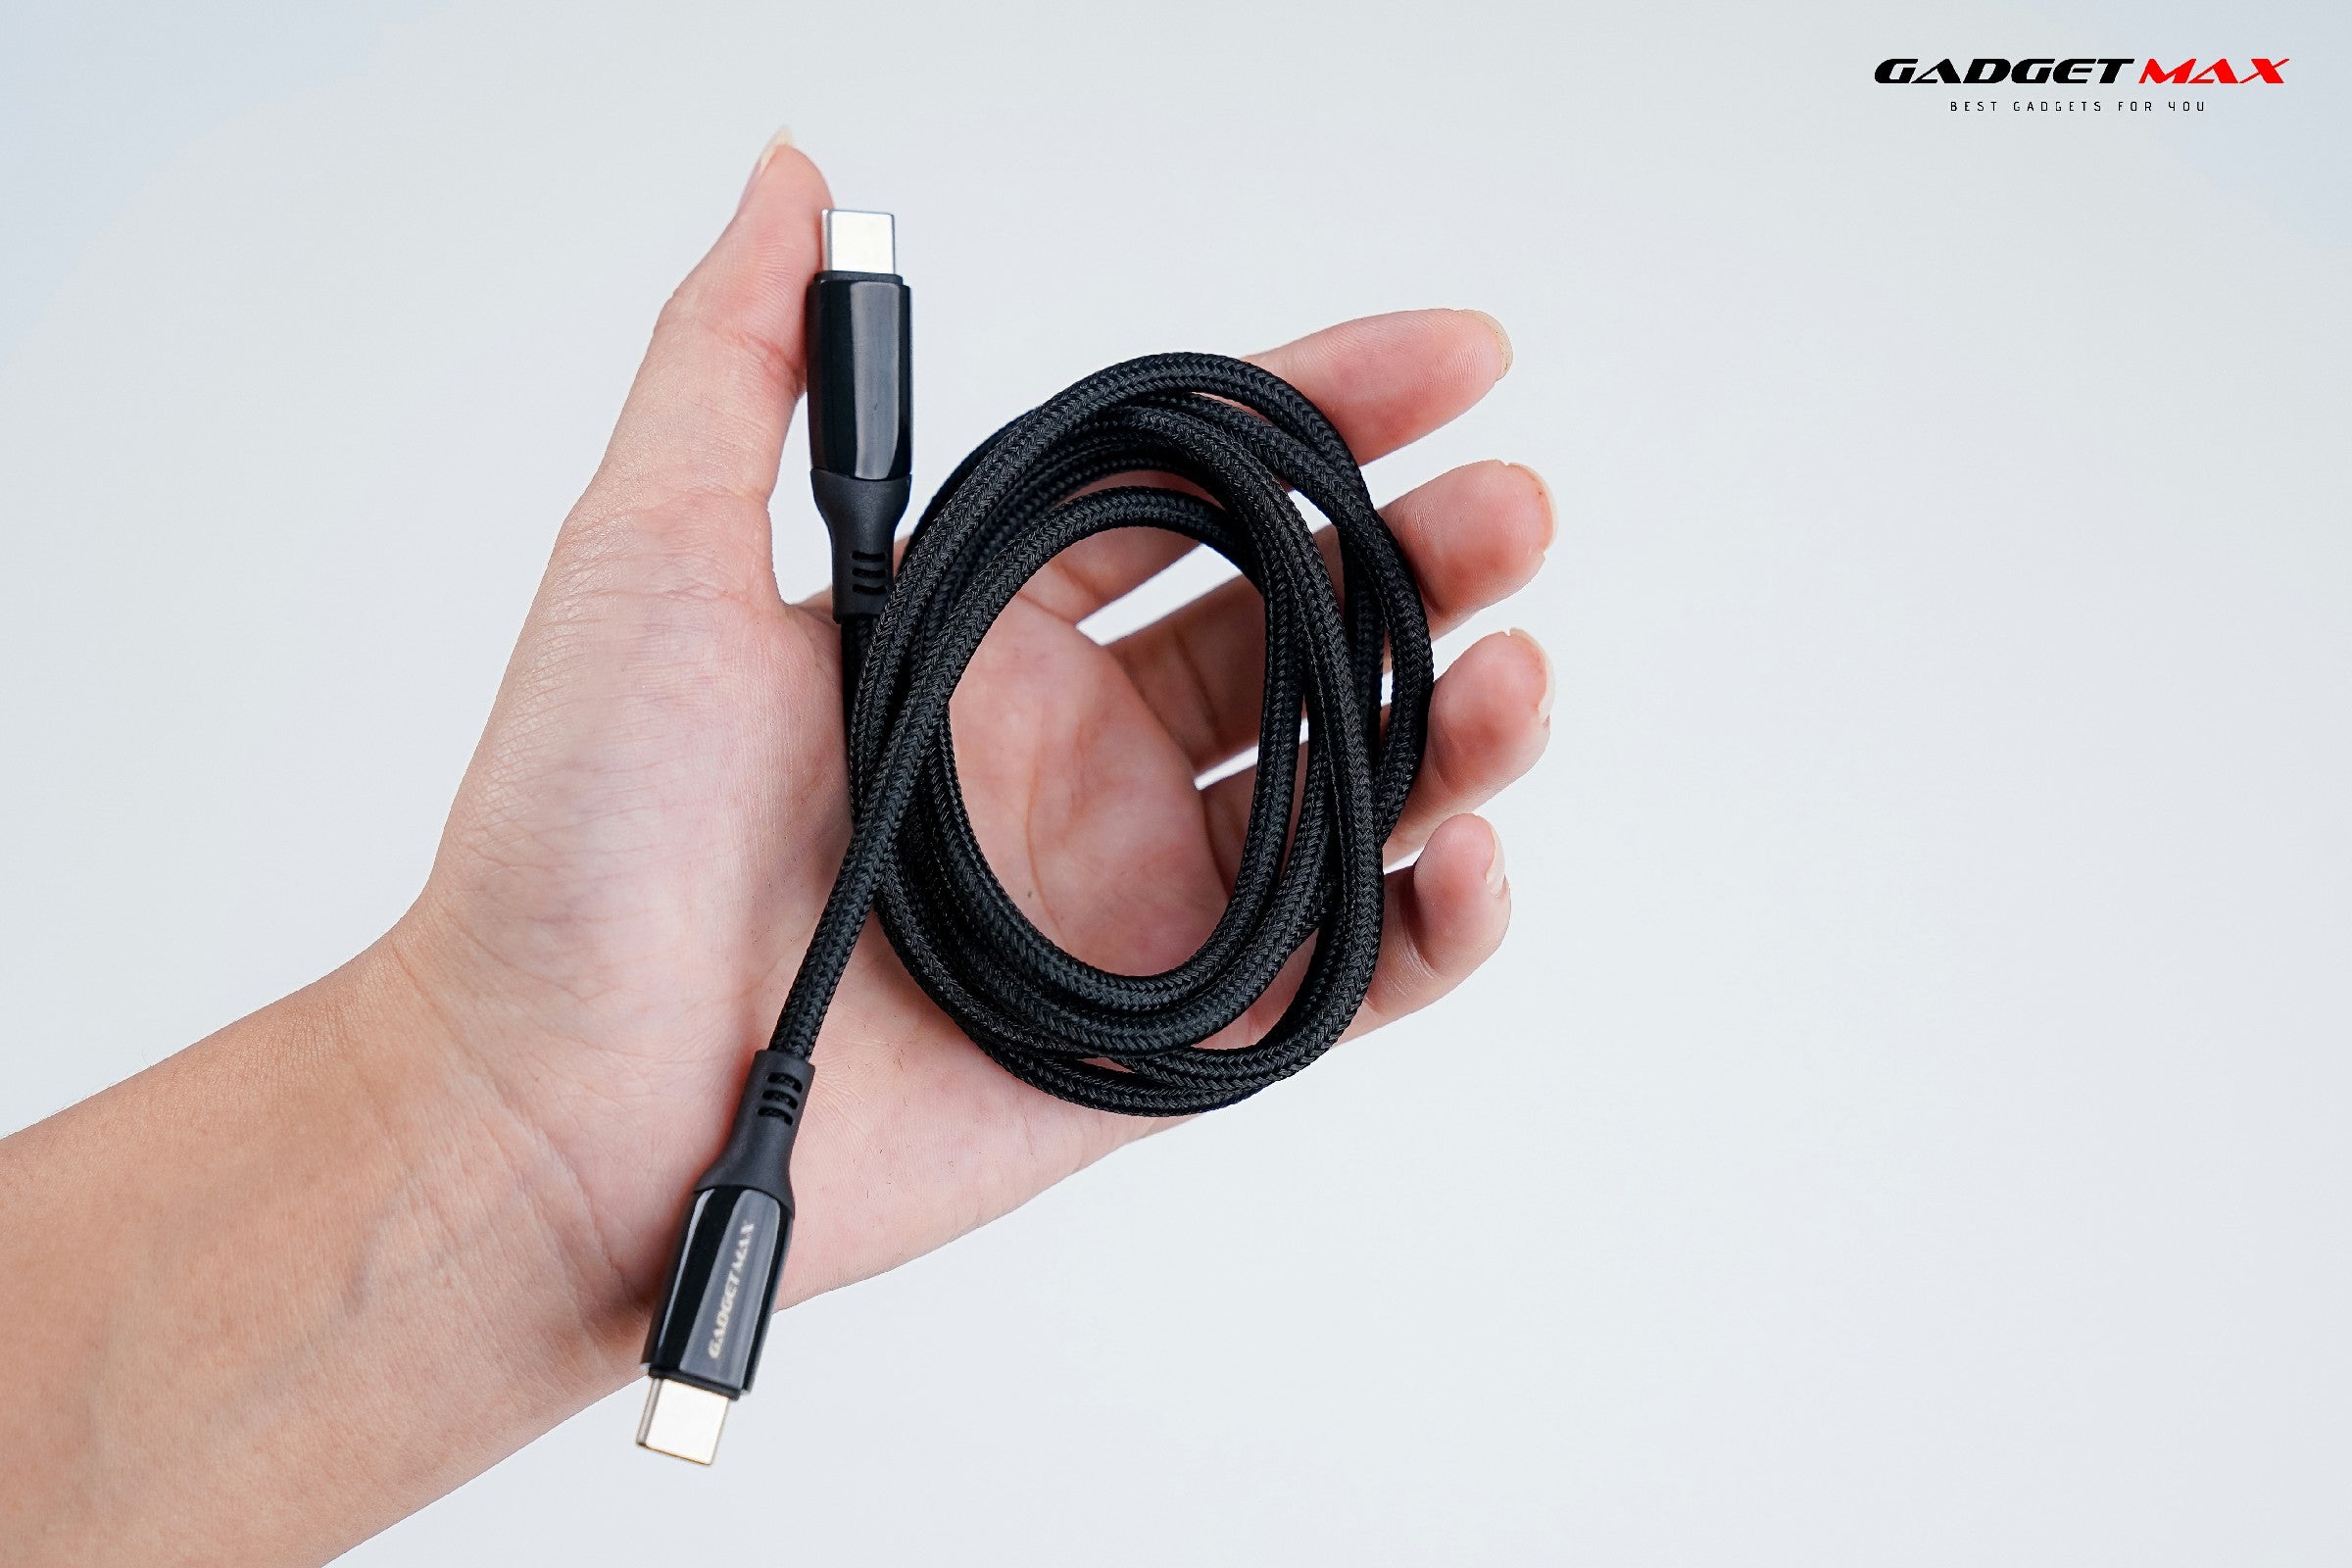 GADGET MAX GX22 100W TYPE C TO TYPE C 5A POWER DISPLAY CABLE (100W)(5A), Type-C to Type-C 100W Cable, 5A Cable